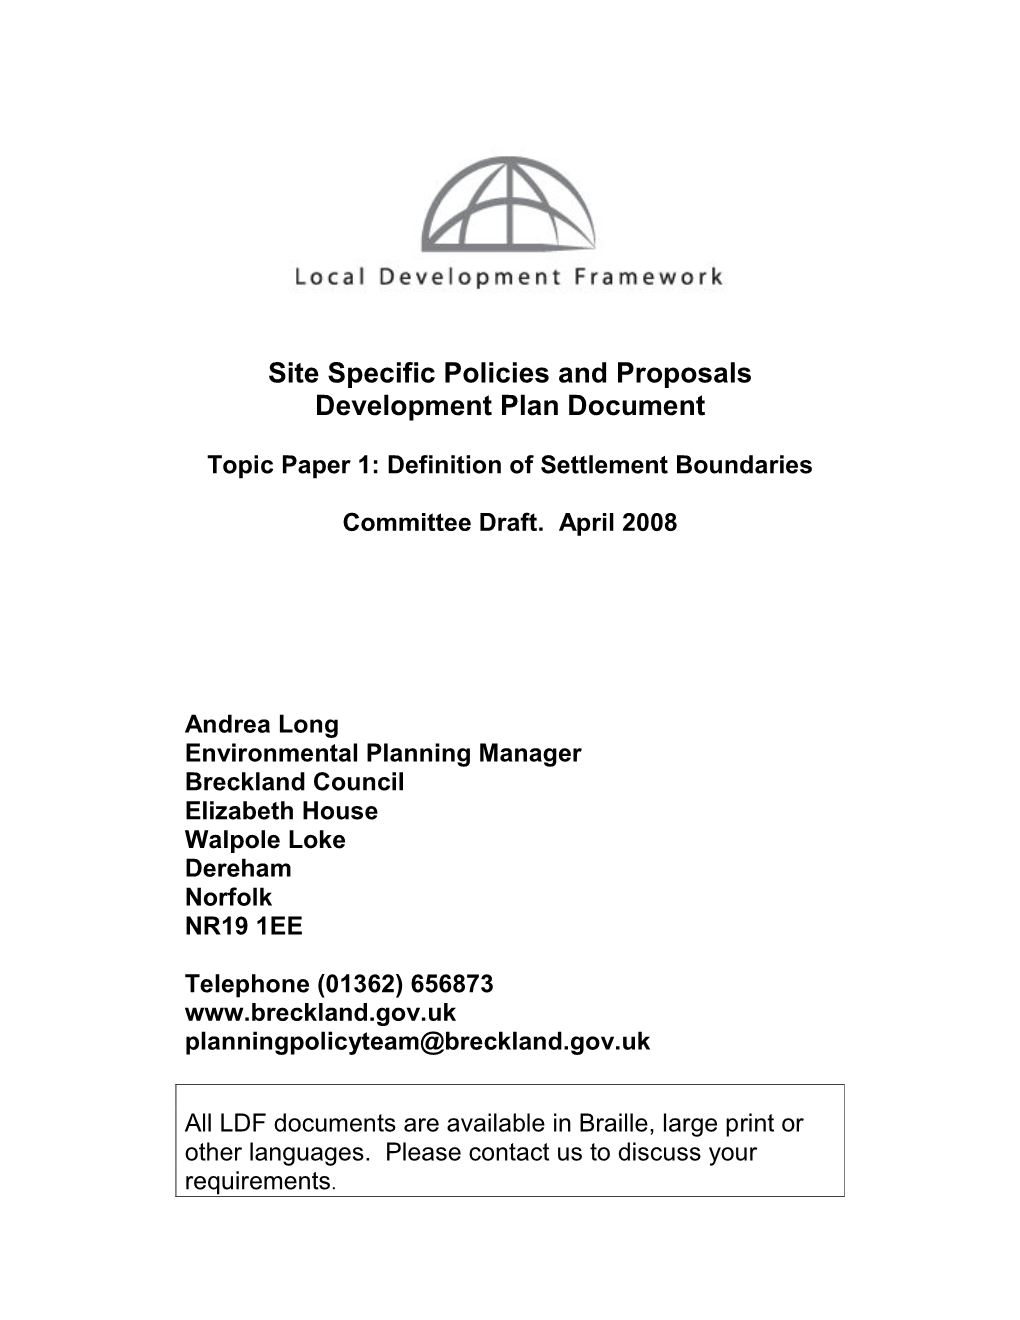 Site Specific Policies and Proposals Development Plan Document